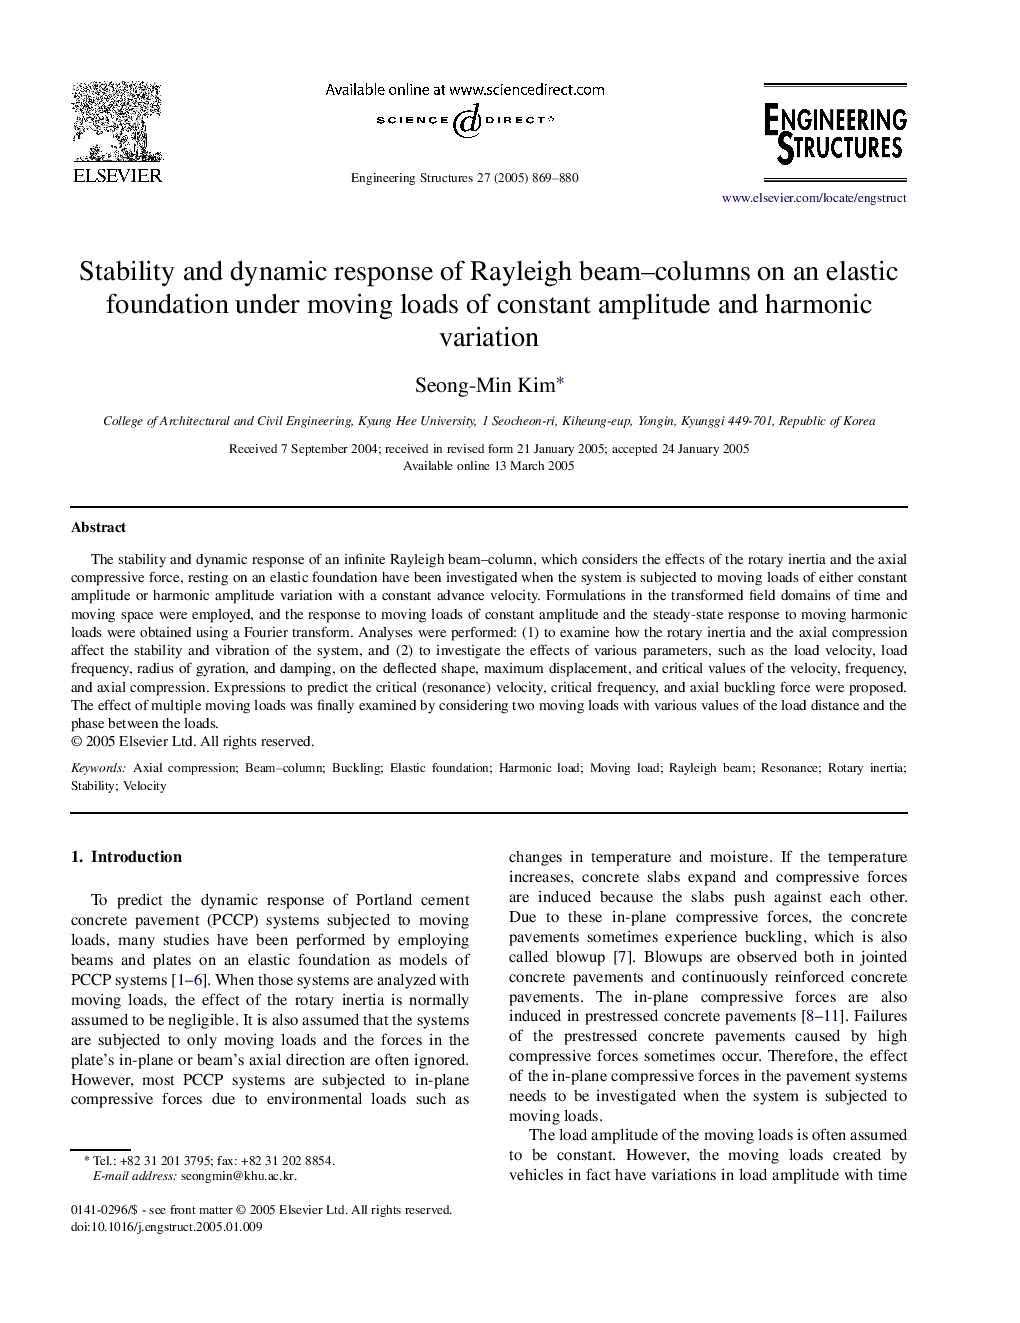 Stability and dynamic response of Rayleigh beam-columns on an elastic foundation under moving loads of constant amplitude and harmonic variation